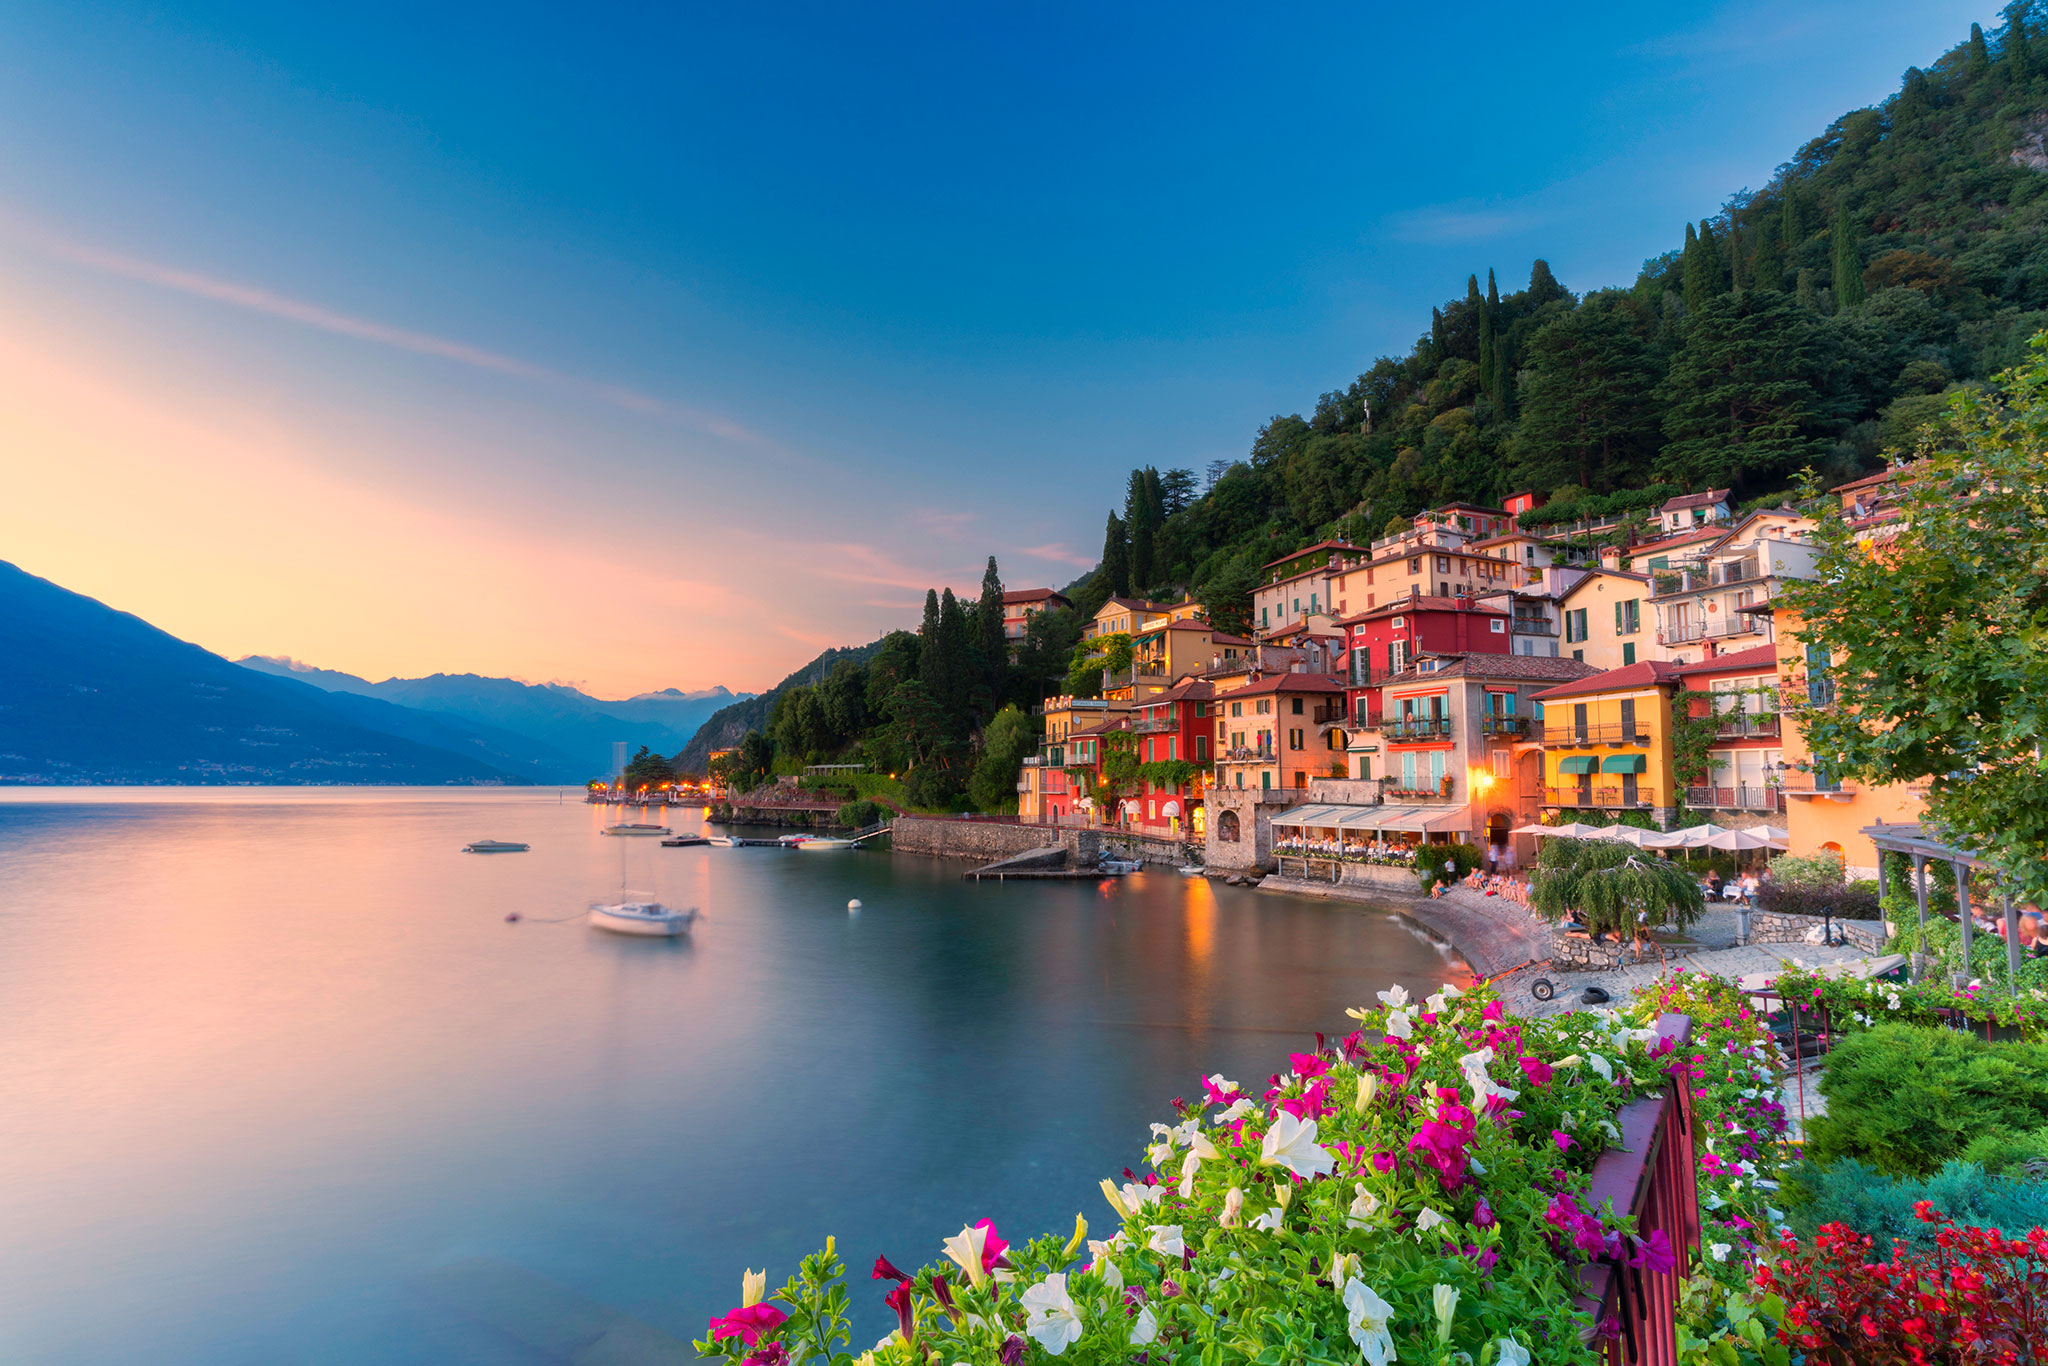 Sunset spotlights the traditional village of Varenna on the shore of Lake Como.